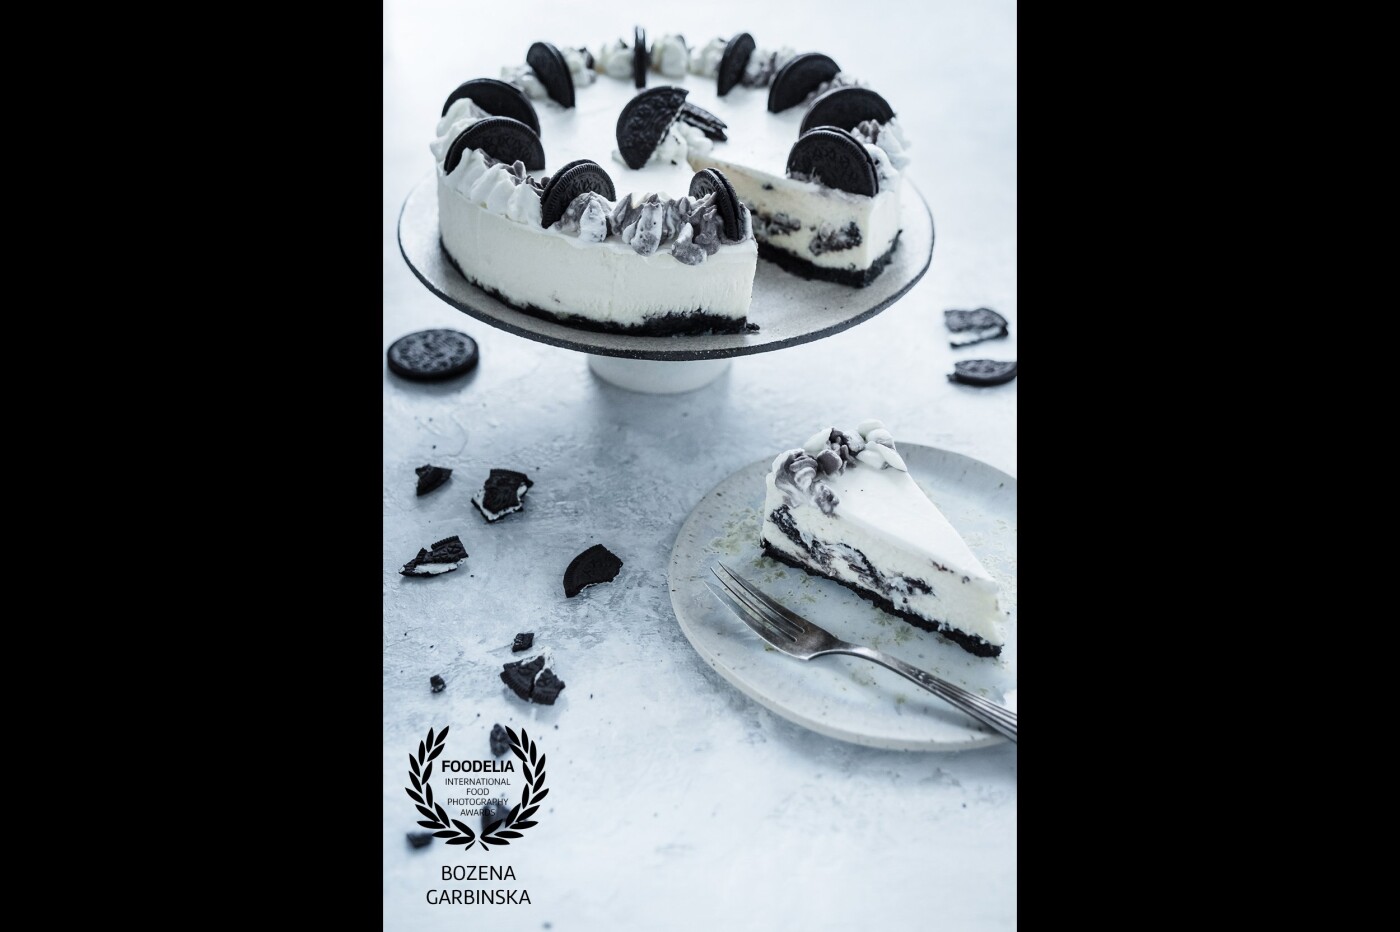 Oreo cheesecake - this cheesecake my daughter likes the most :-)<br />
Camera: Fuji X-T20<br />
Lens: Fujinon 80 mm macro<br />
Settings: ISO 1.600, f/2.8, 1/30 sec, tripod, daylight (just before sunset)